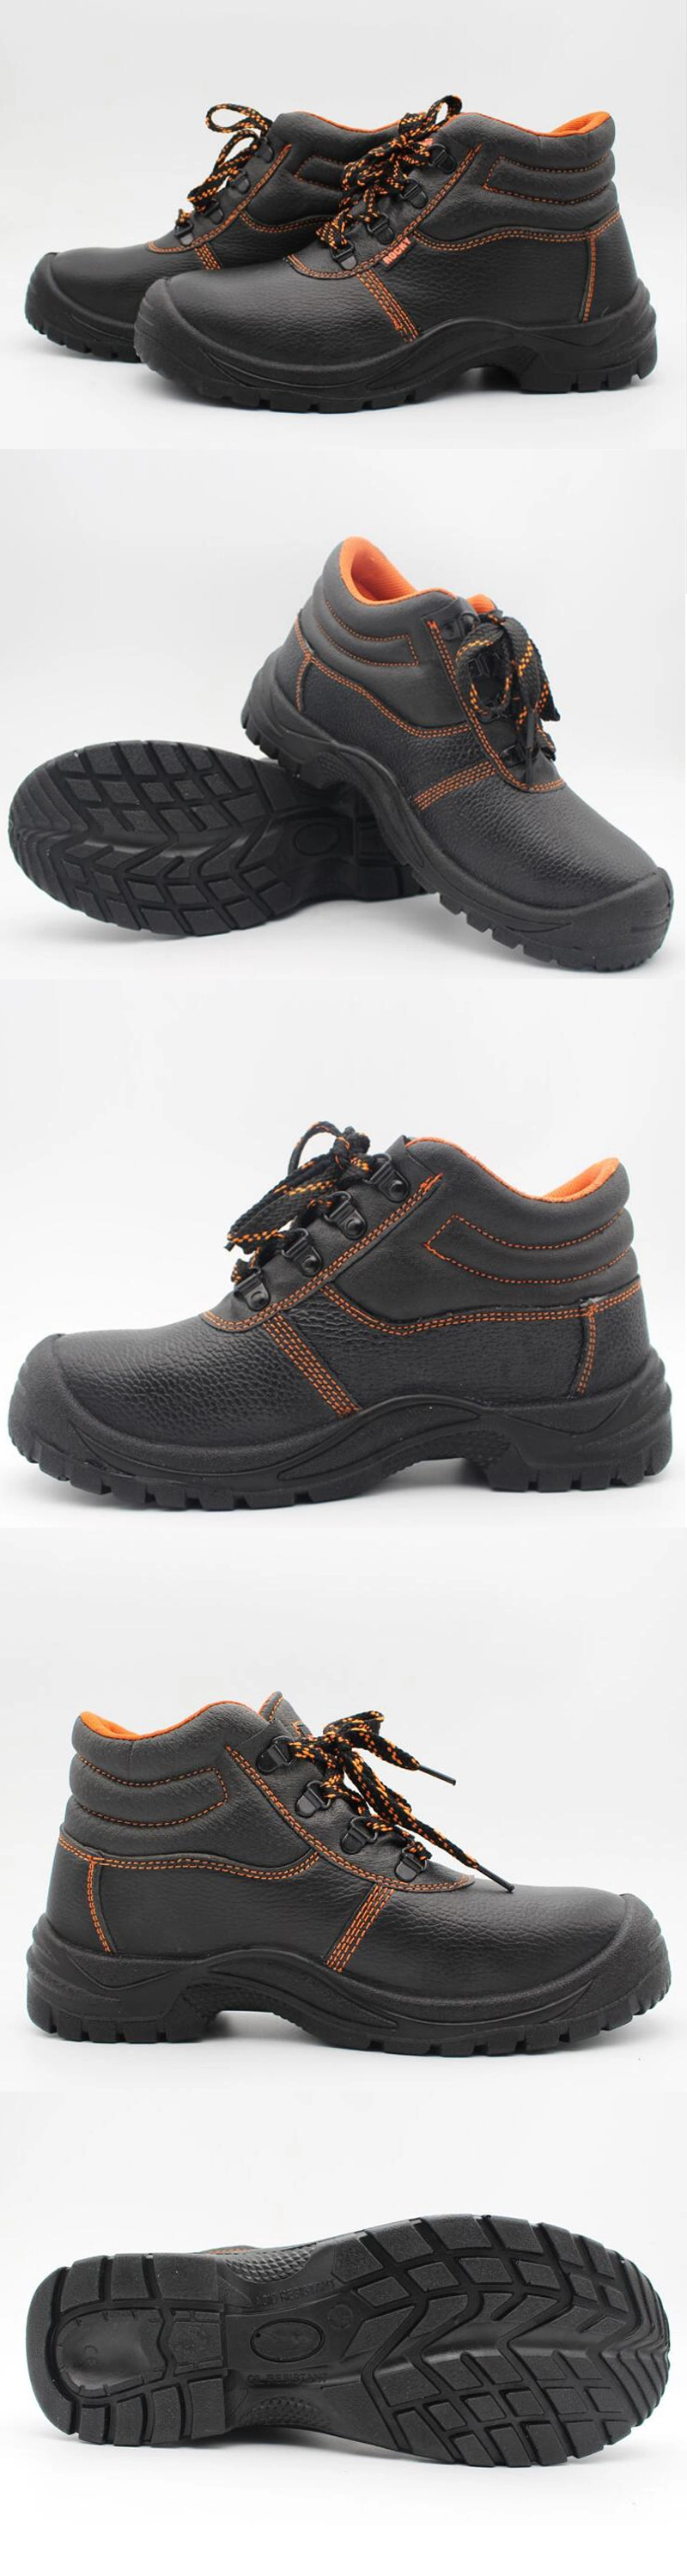 Slip-Resistant Working Safety Shoes Puncture-Resistant Leather Shoes Steel Toes Safety Footwear